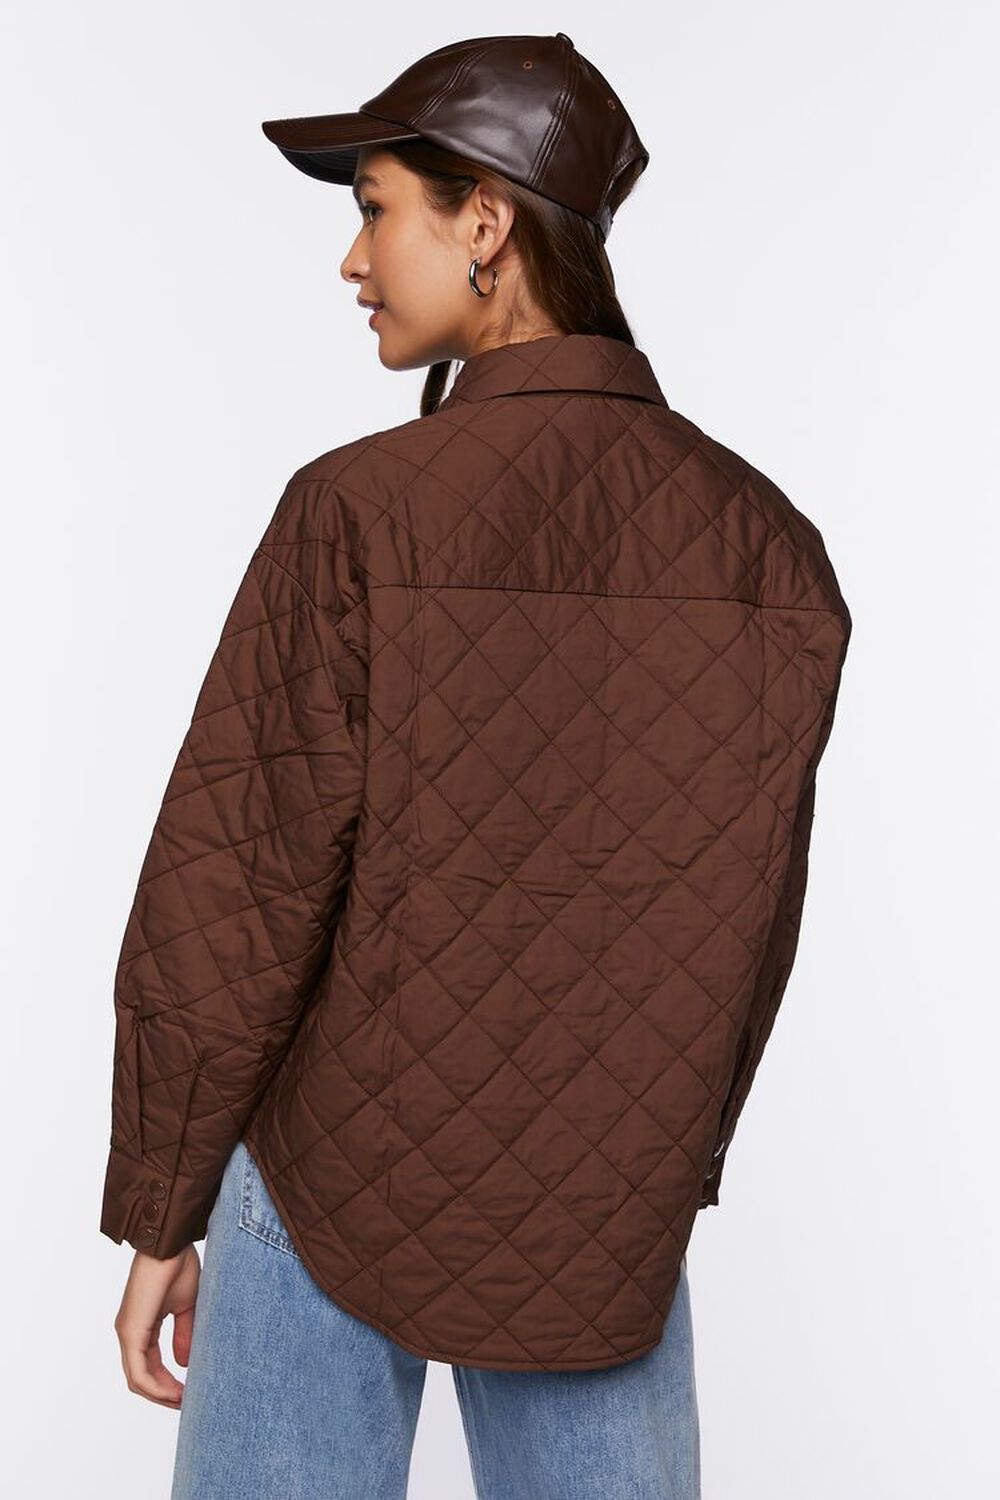 CHOCOLATE Quilted Dolphin-Hem Shacket, image 3